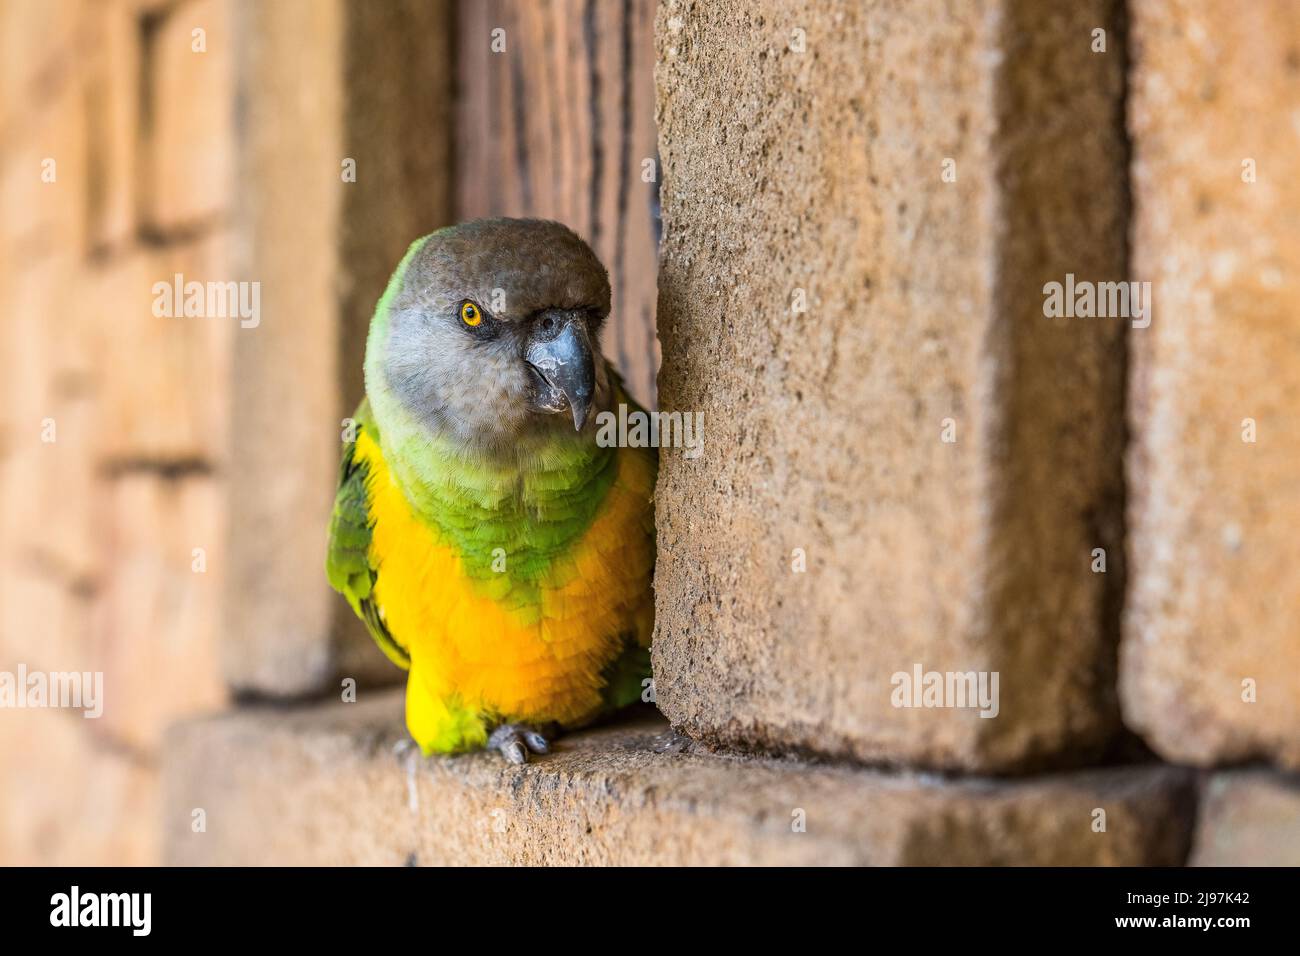 The Senegal parrot (Poicephalus senegalus) is a parrot which is a resident breeder across a wide range of west Africa. Stock Photo